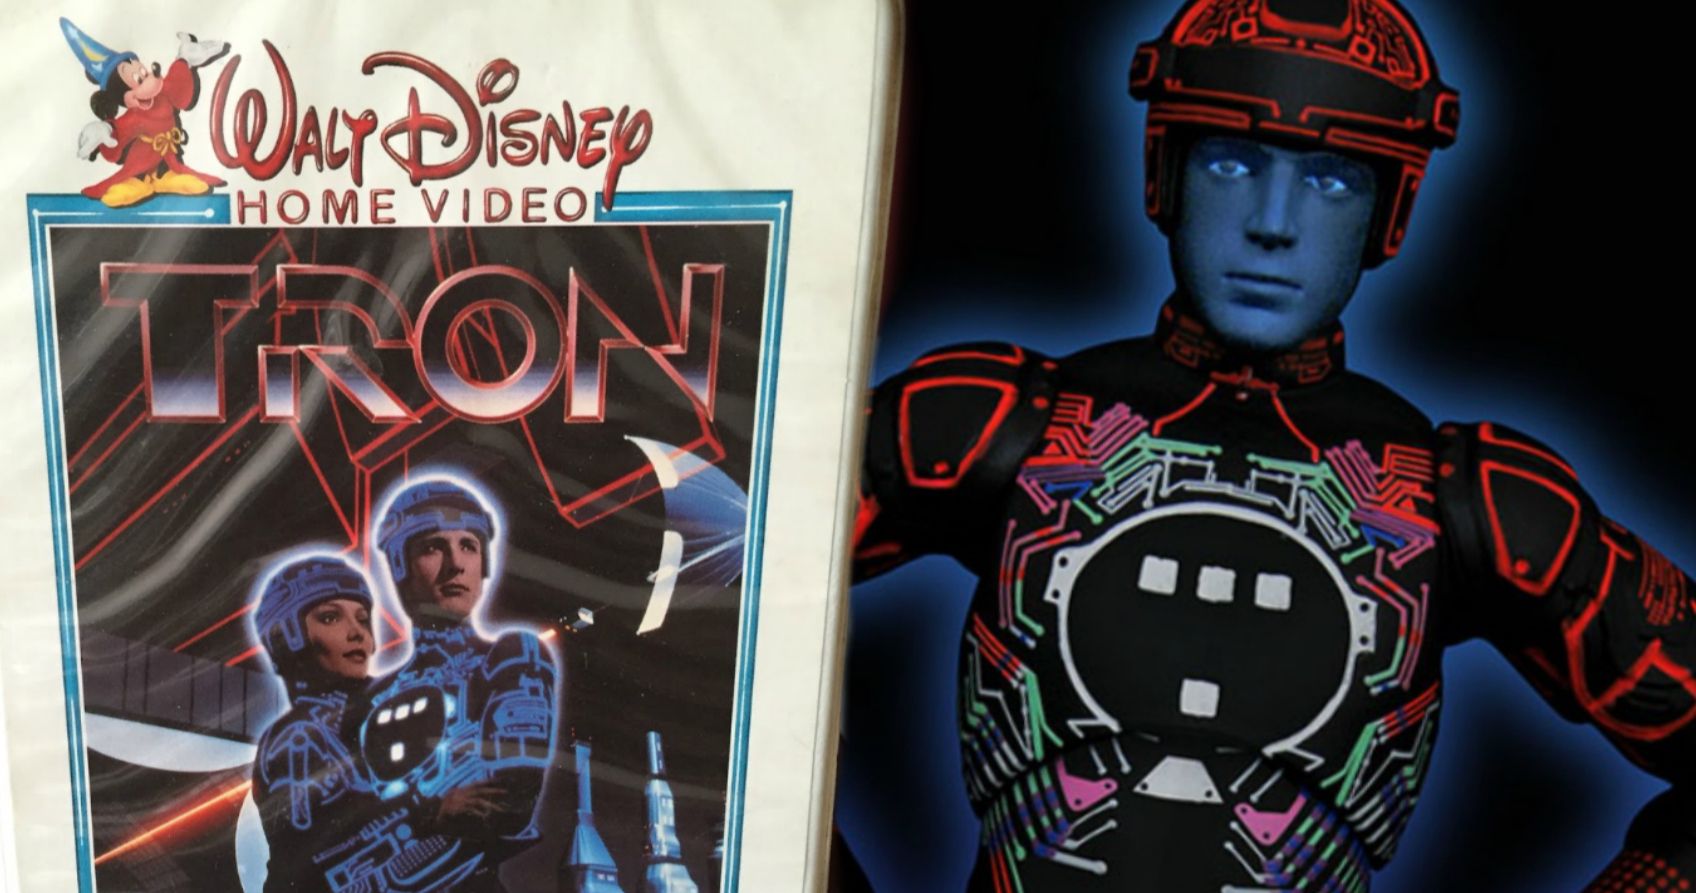 Exclusive Tron Comic-Con 2020 Action Figure Comes in a Real VHS-Style Box